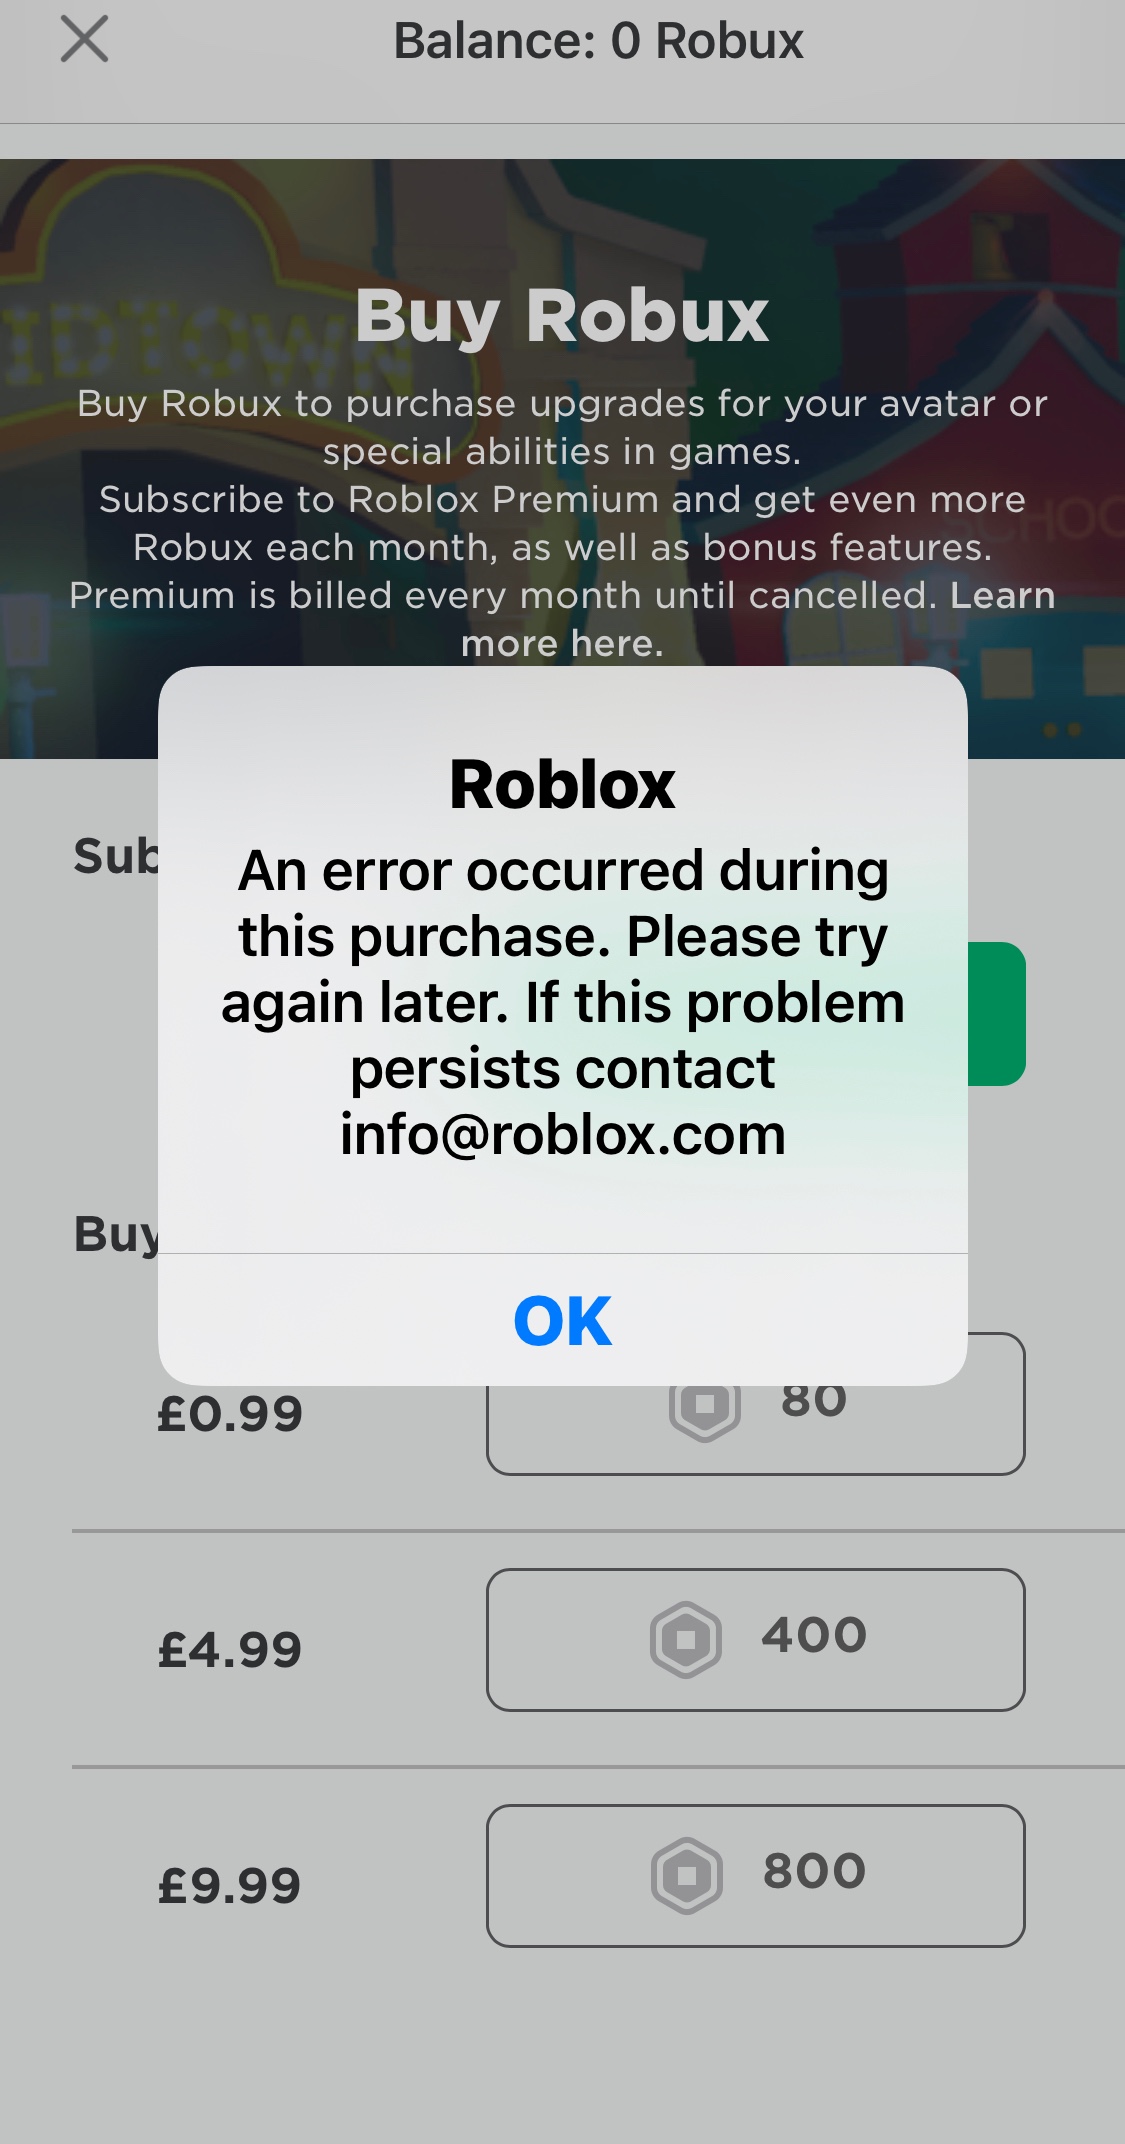 Can't buy Robux - Apple Community